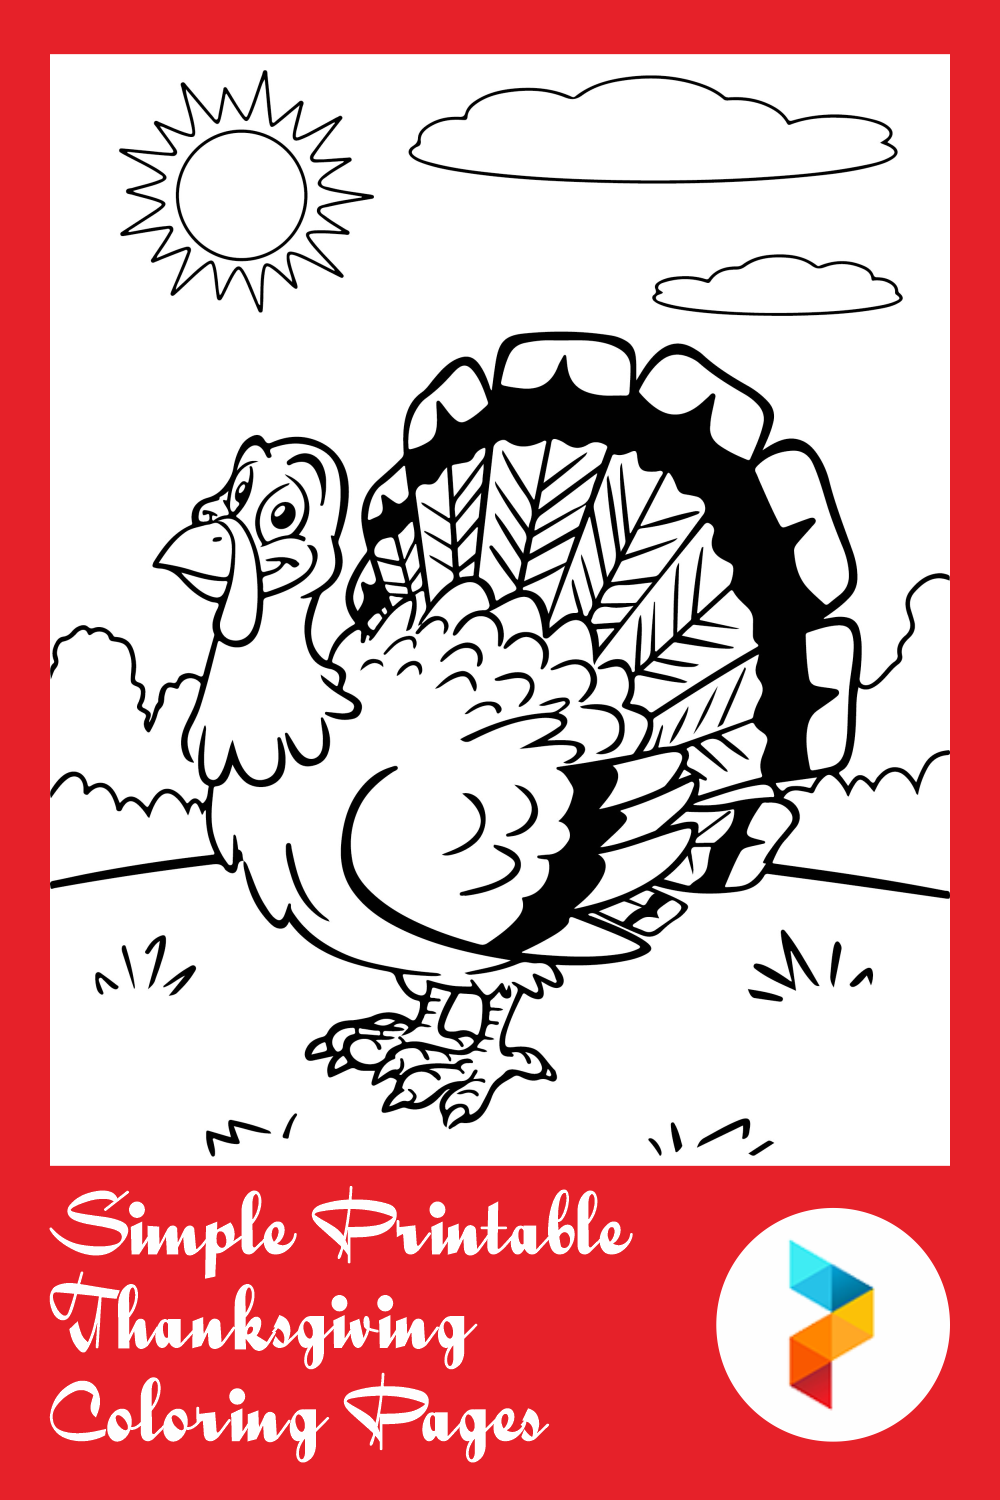 Simple Printable Thanksgiving Coloring Pages